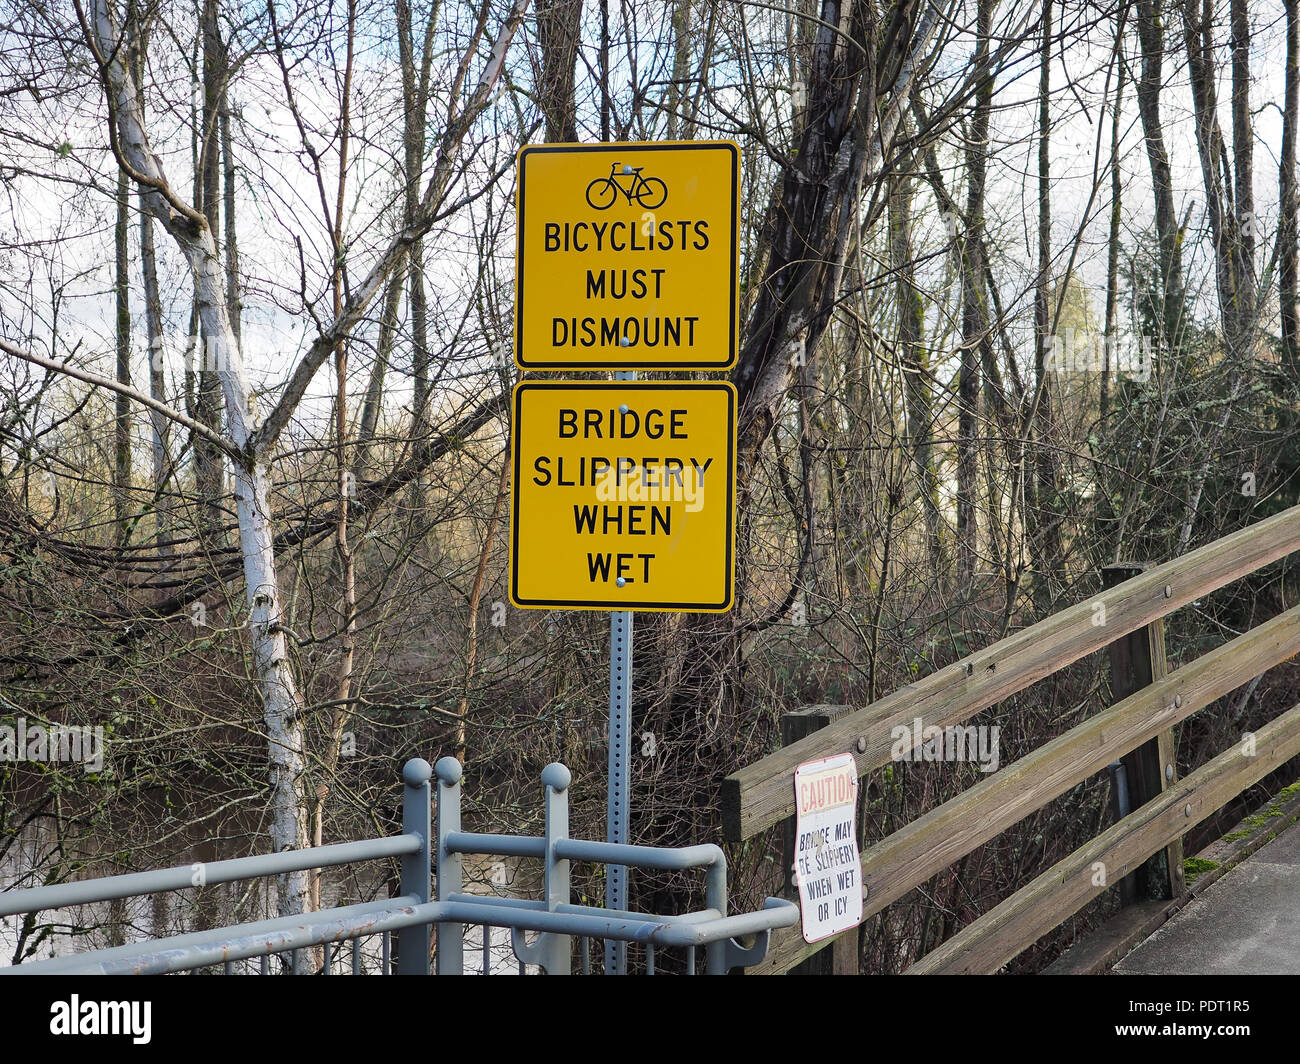 Signs 'Bicyclists must dismount' and 'Bridge slipper when wet' in Bothell, WA, USA Stock Photo